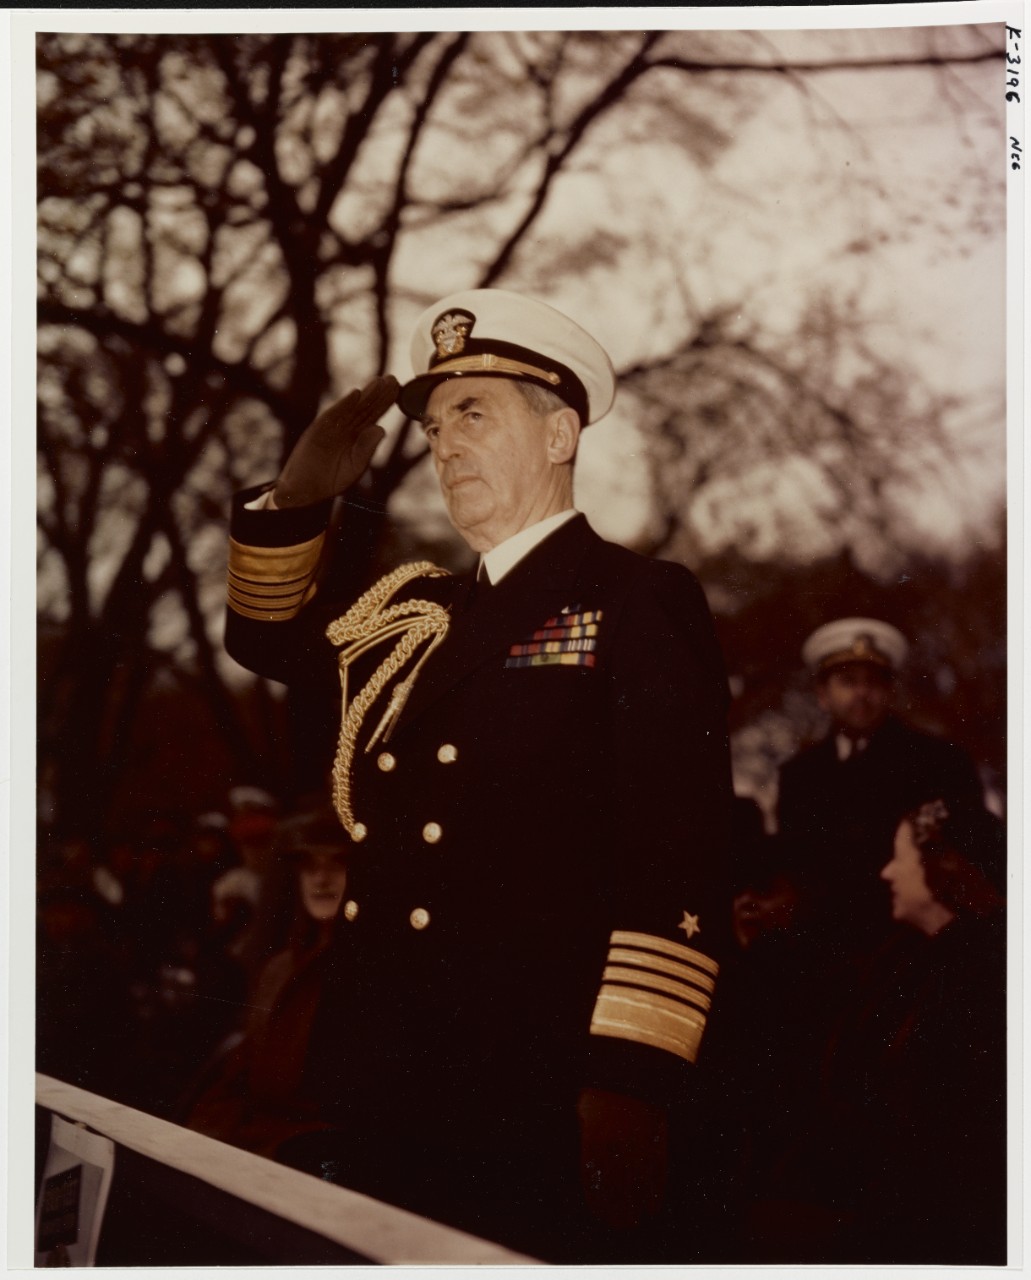 Photo #: 80-G-K-3196 Admiral William D. Leahy, USN, Chief of Staff to the President  